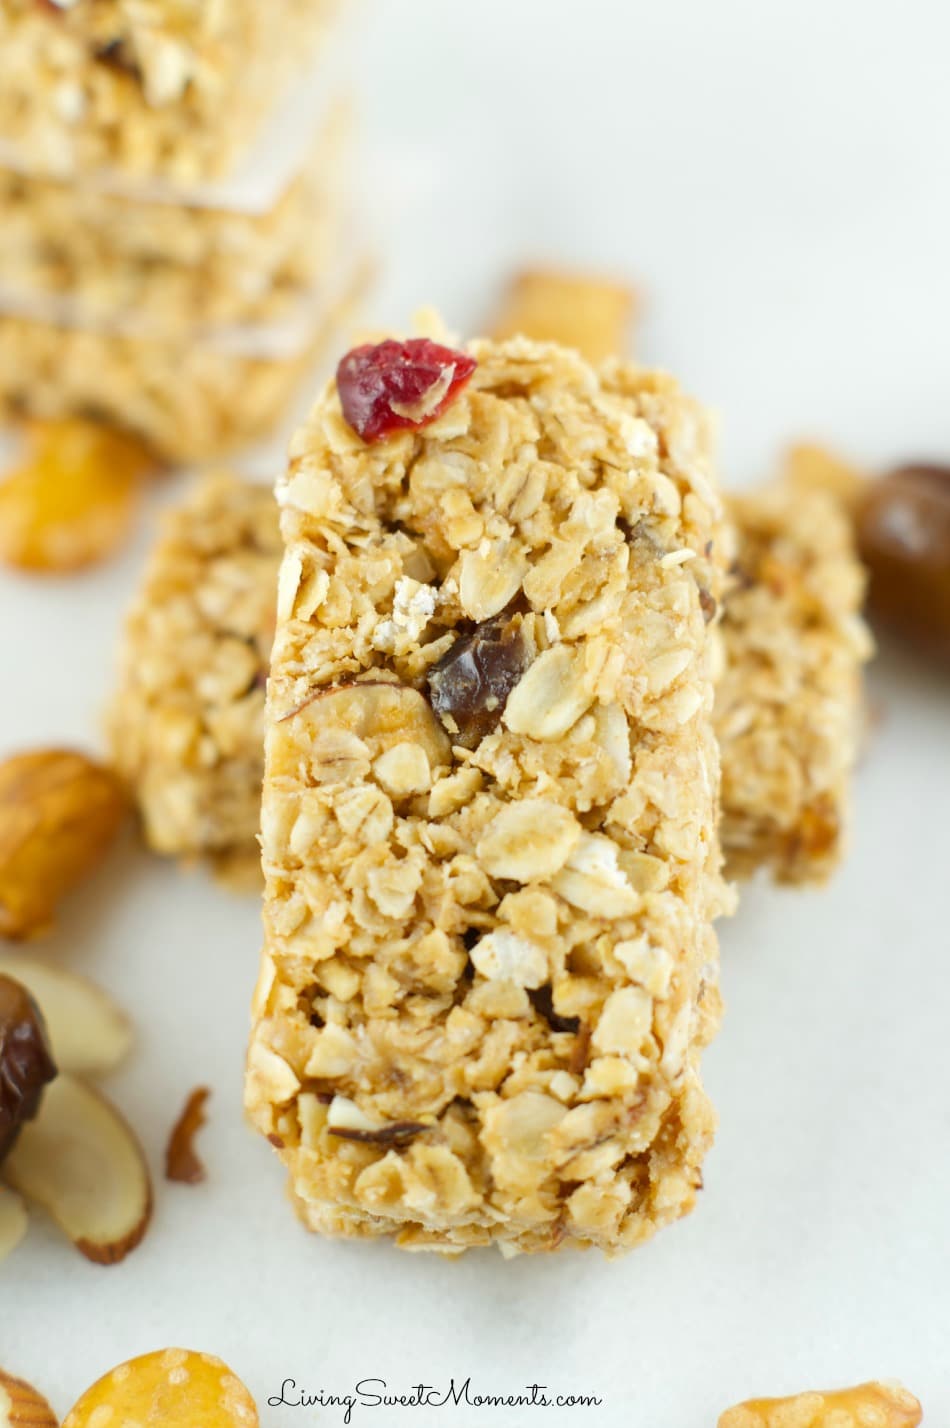 These chewy no bake Sweet And Salty Granola Bars are made with dried fruit, nuts and pretzel pieces. Perfect snack for kids and adults alike! 